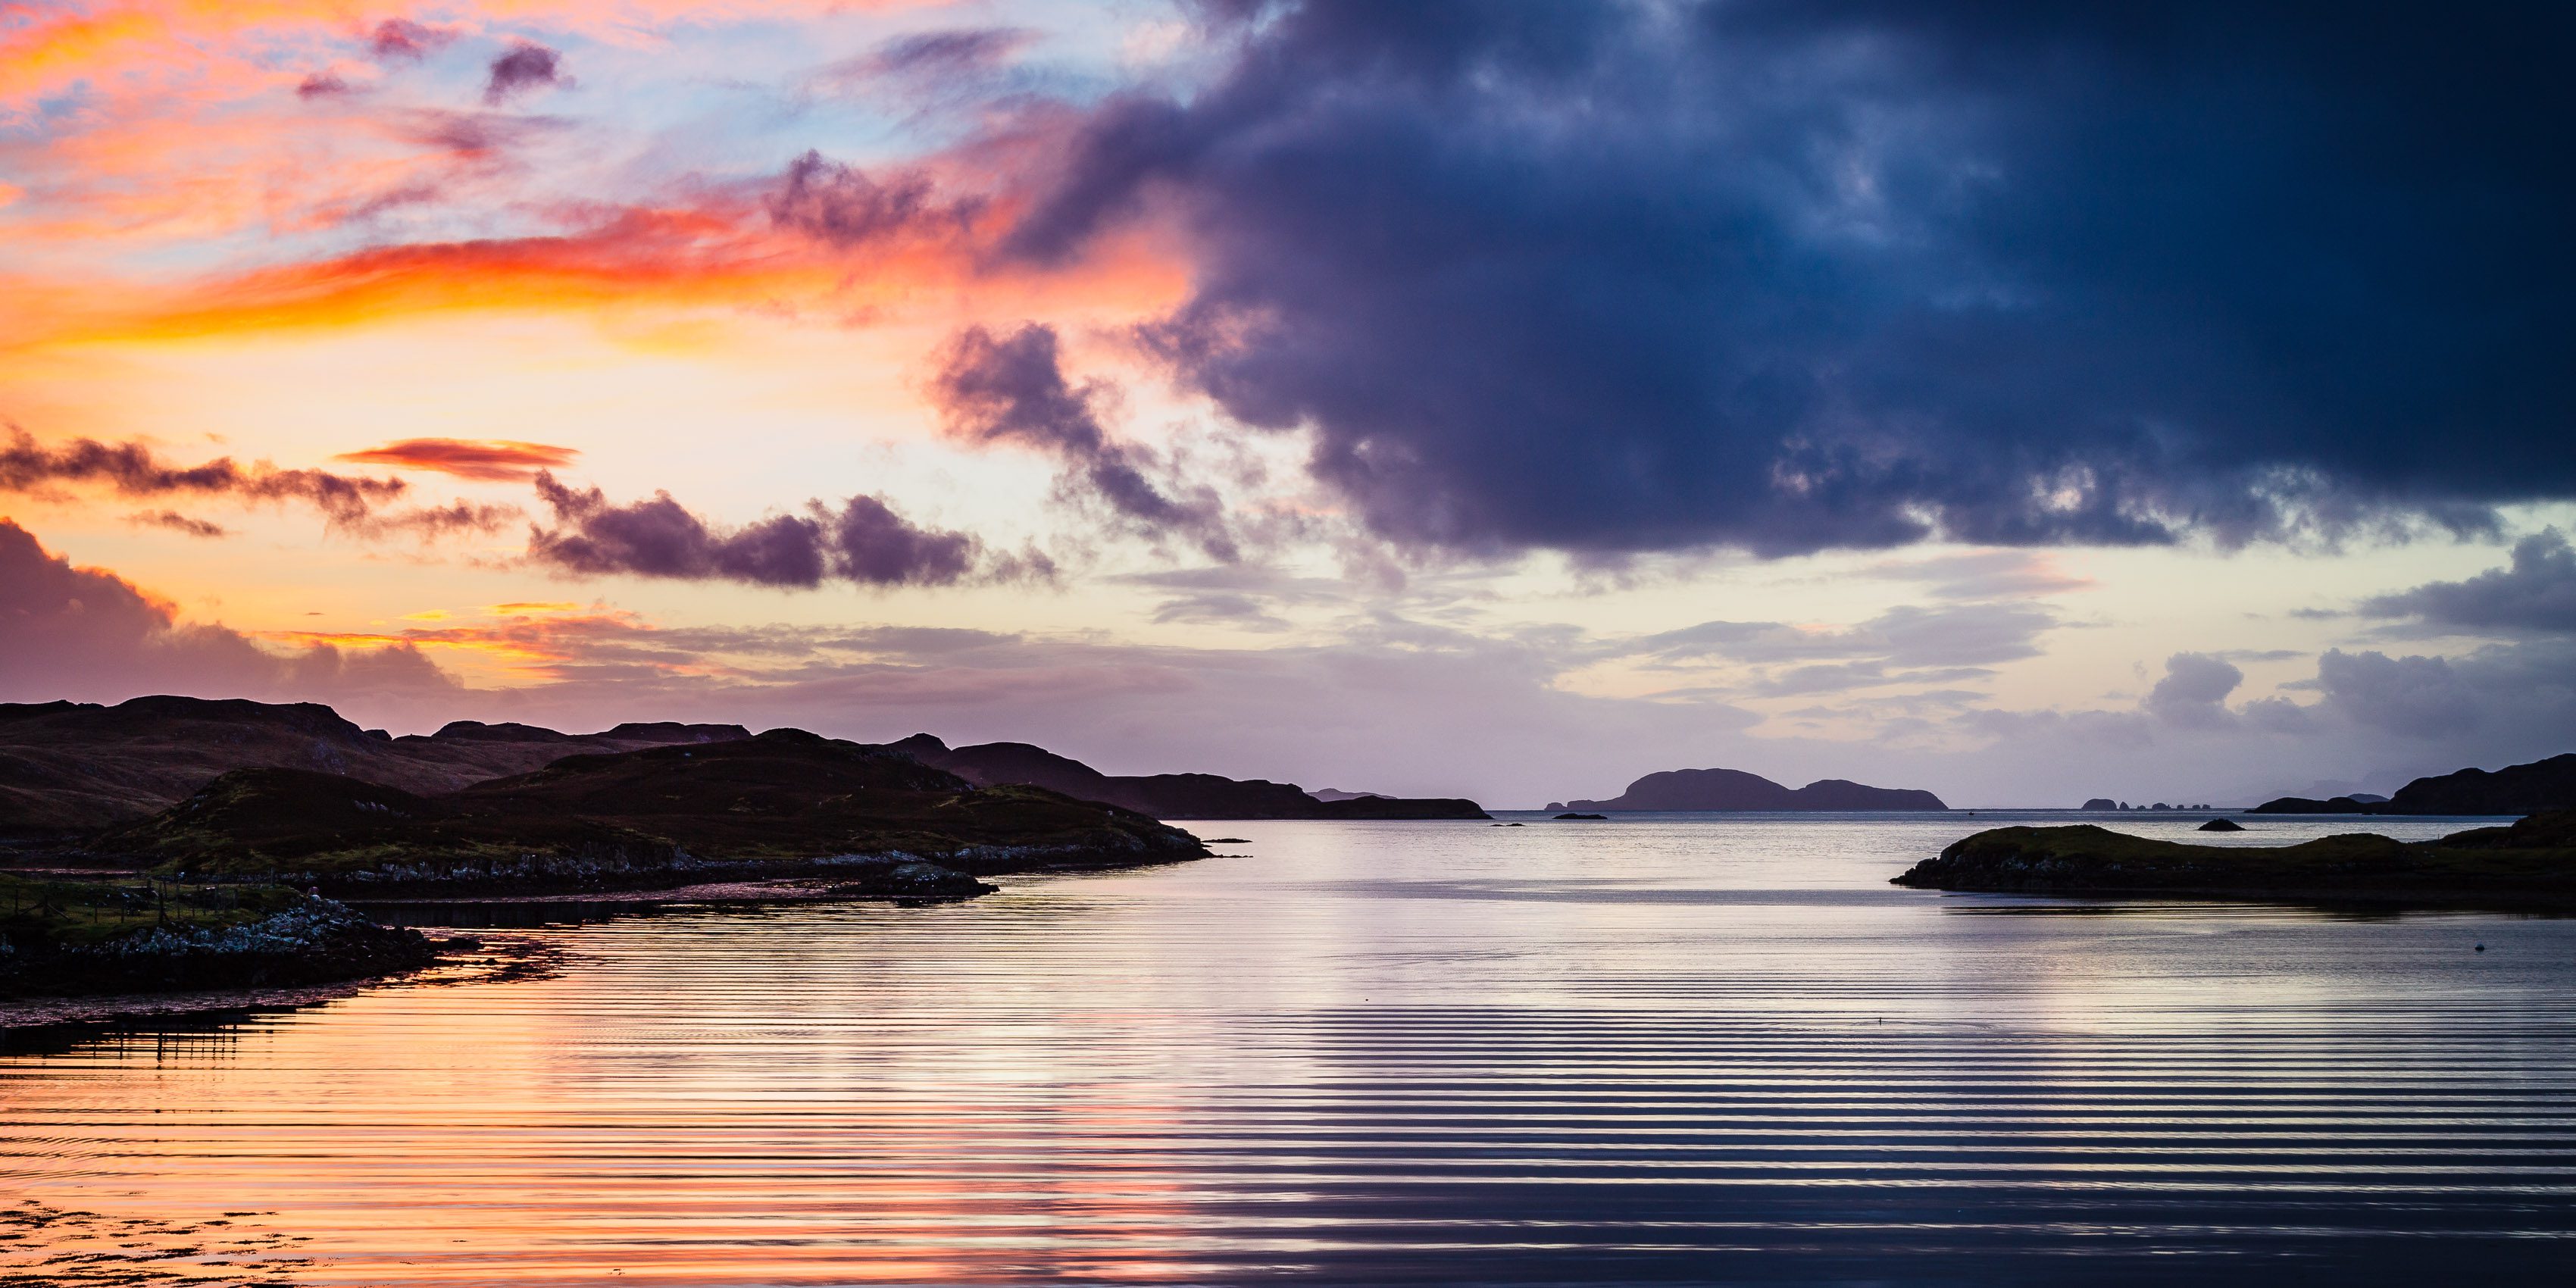 Dawn at Orasaigh (Orinsay), Isle of Lewis, Outer Hebrides, Scotland. HB007